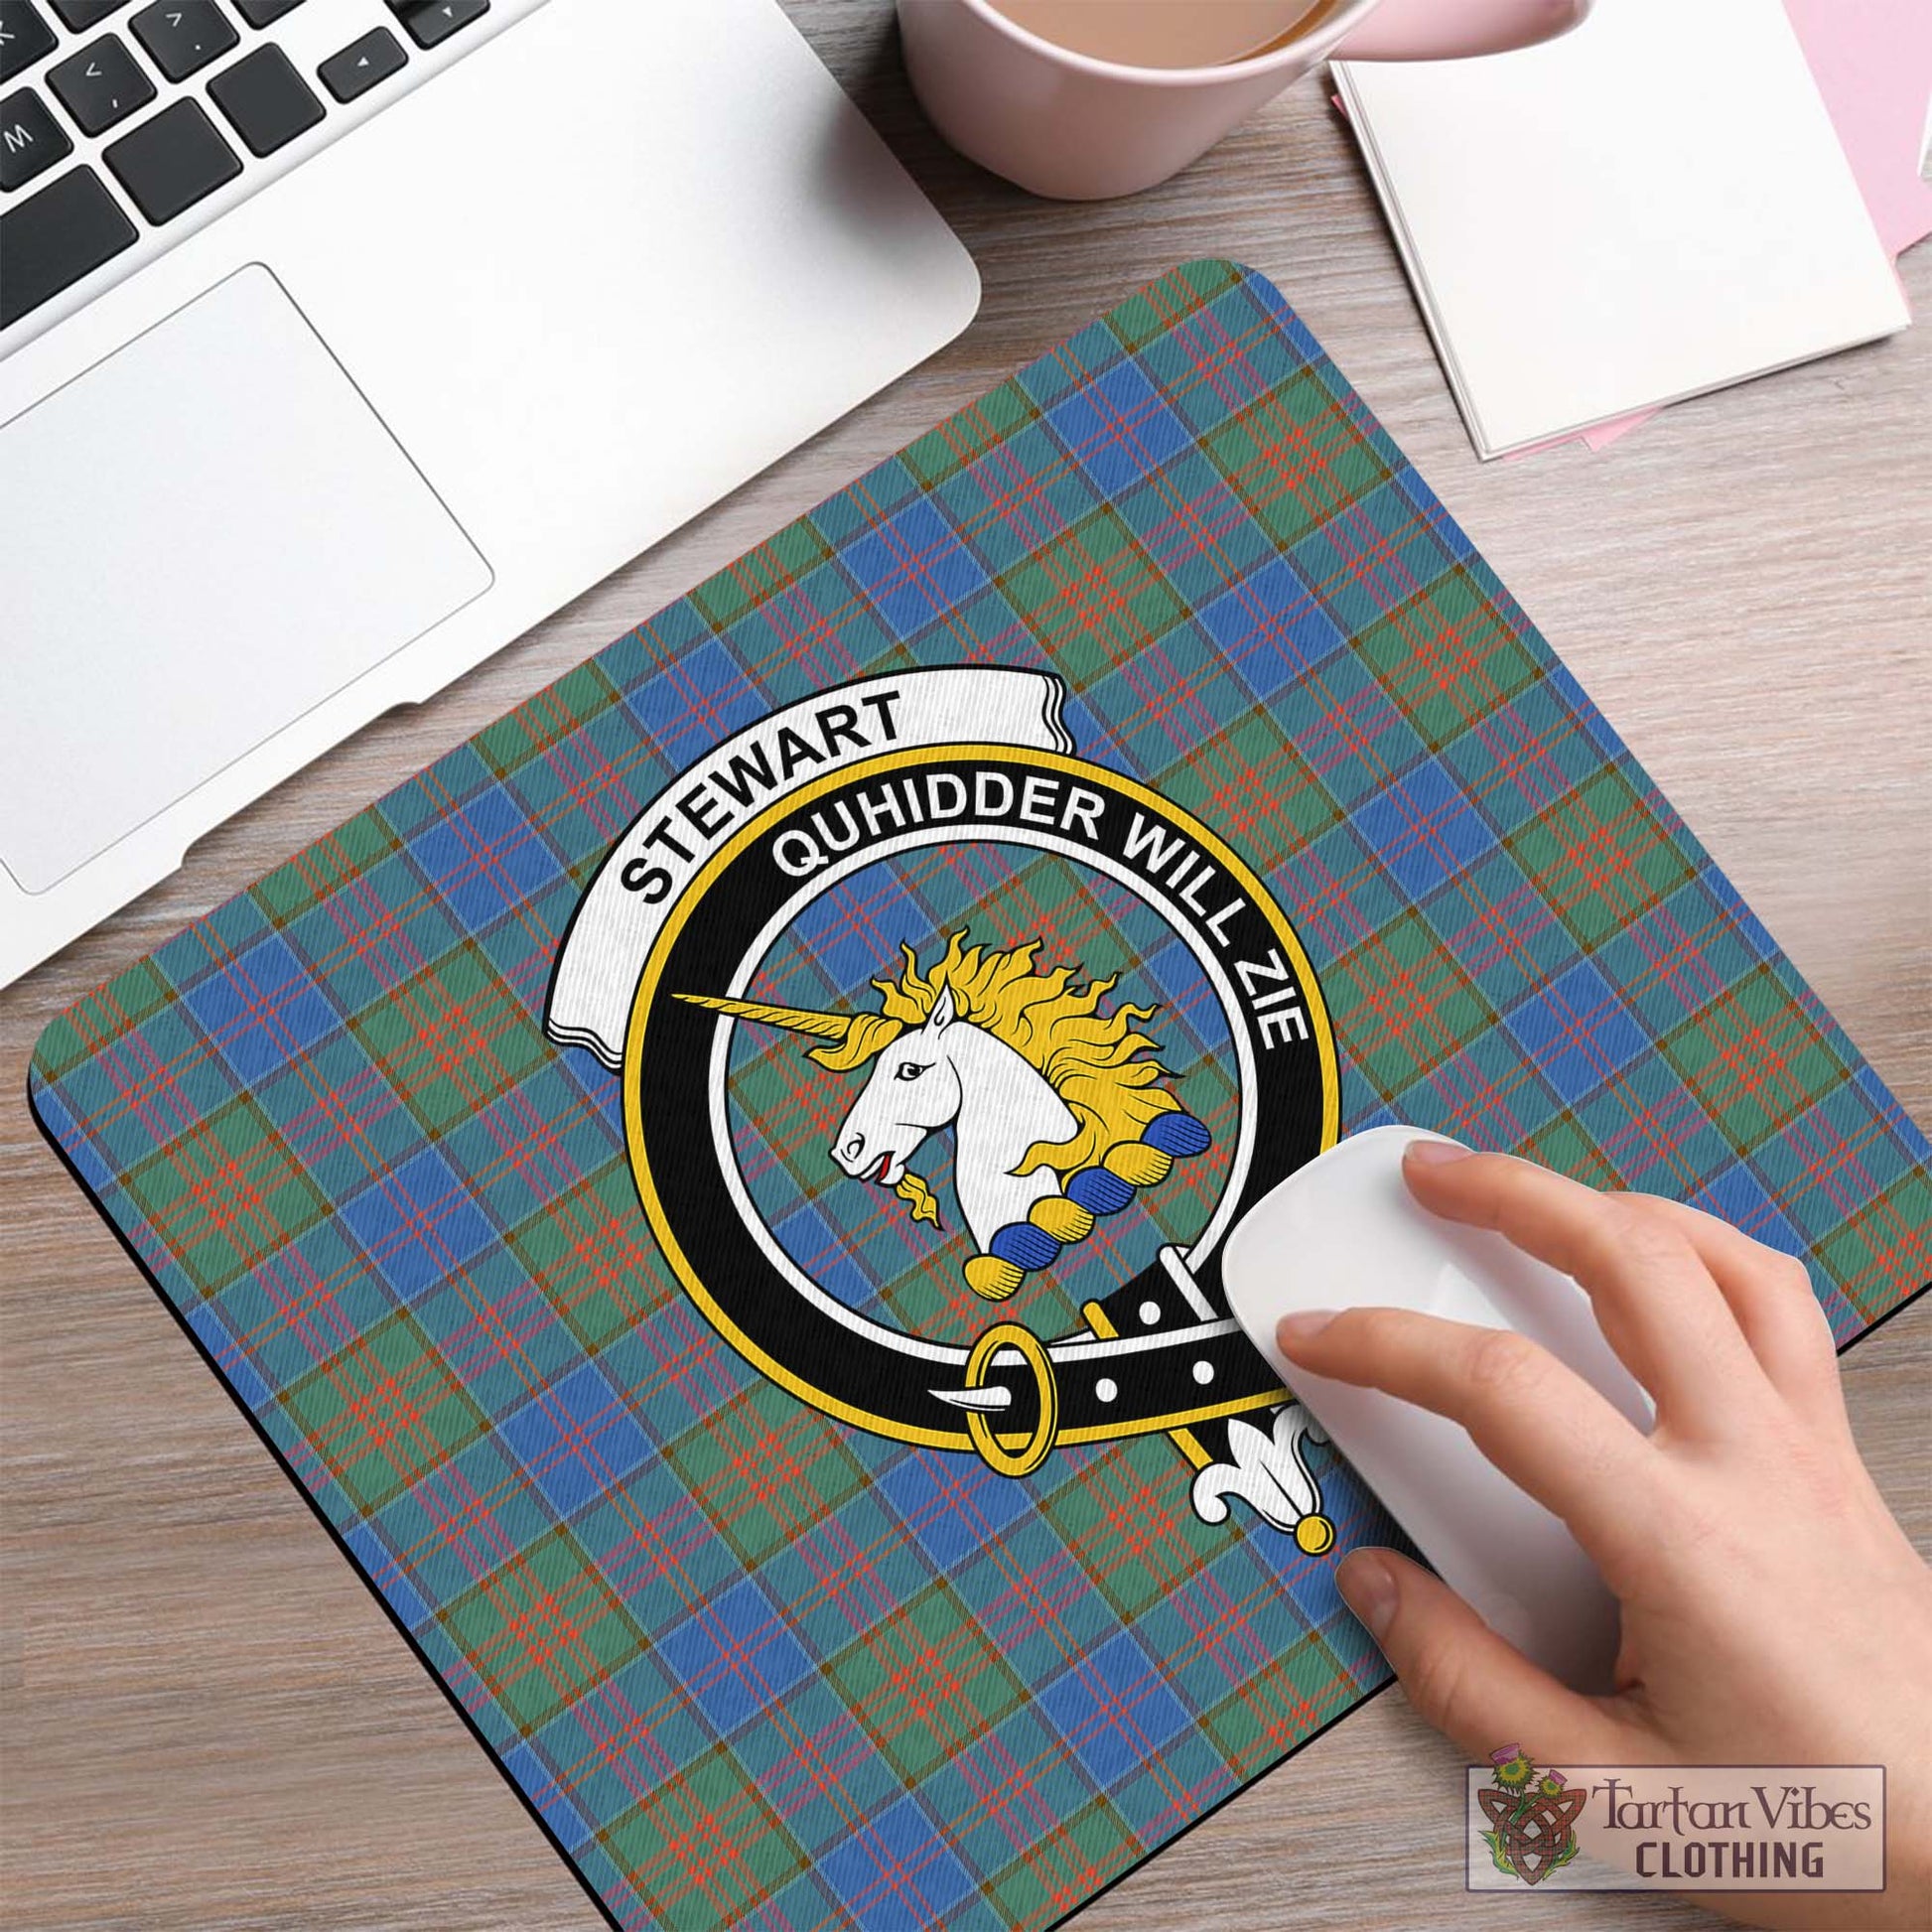 Tartan Vibes Clothing Stewart of Appin Hunting Ancient Tartan Mouse Pad with Family Crest